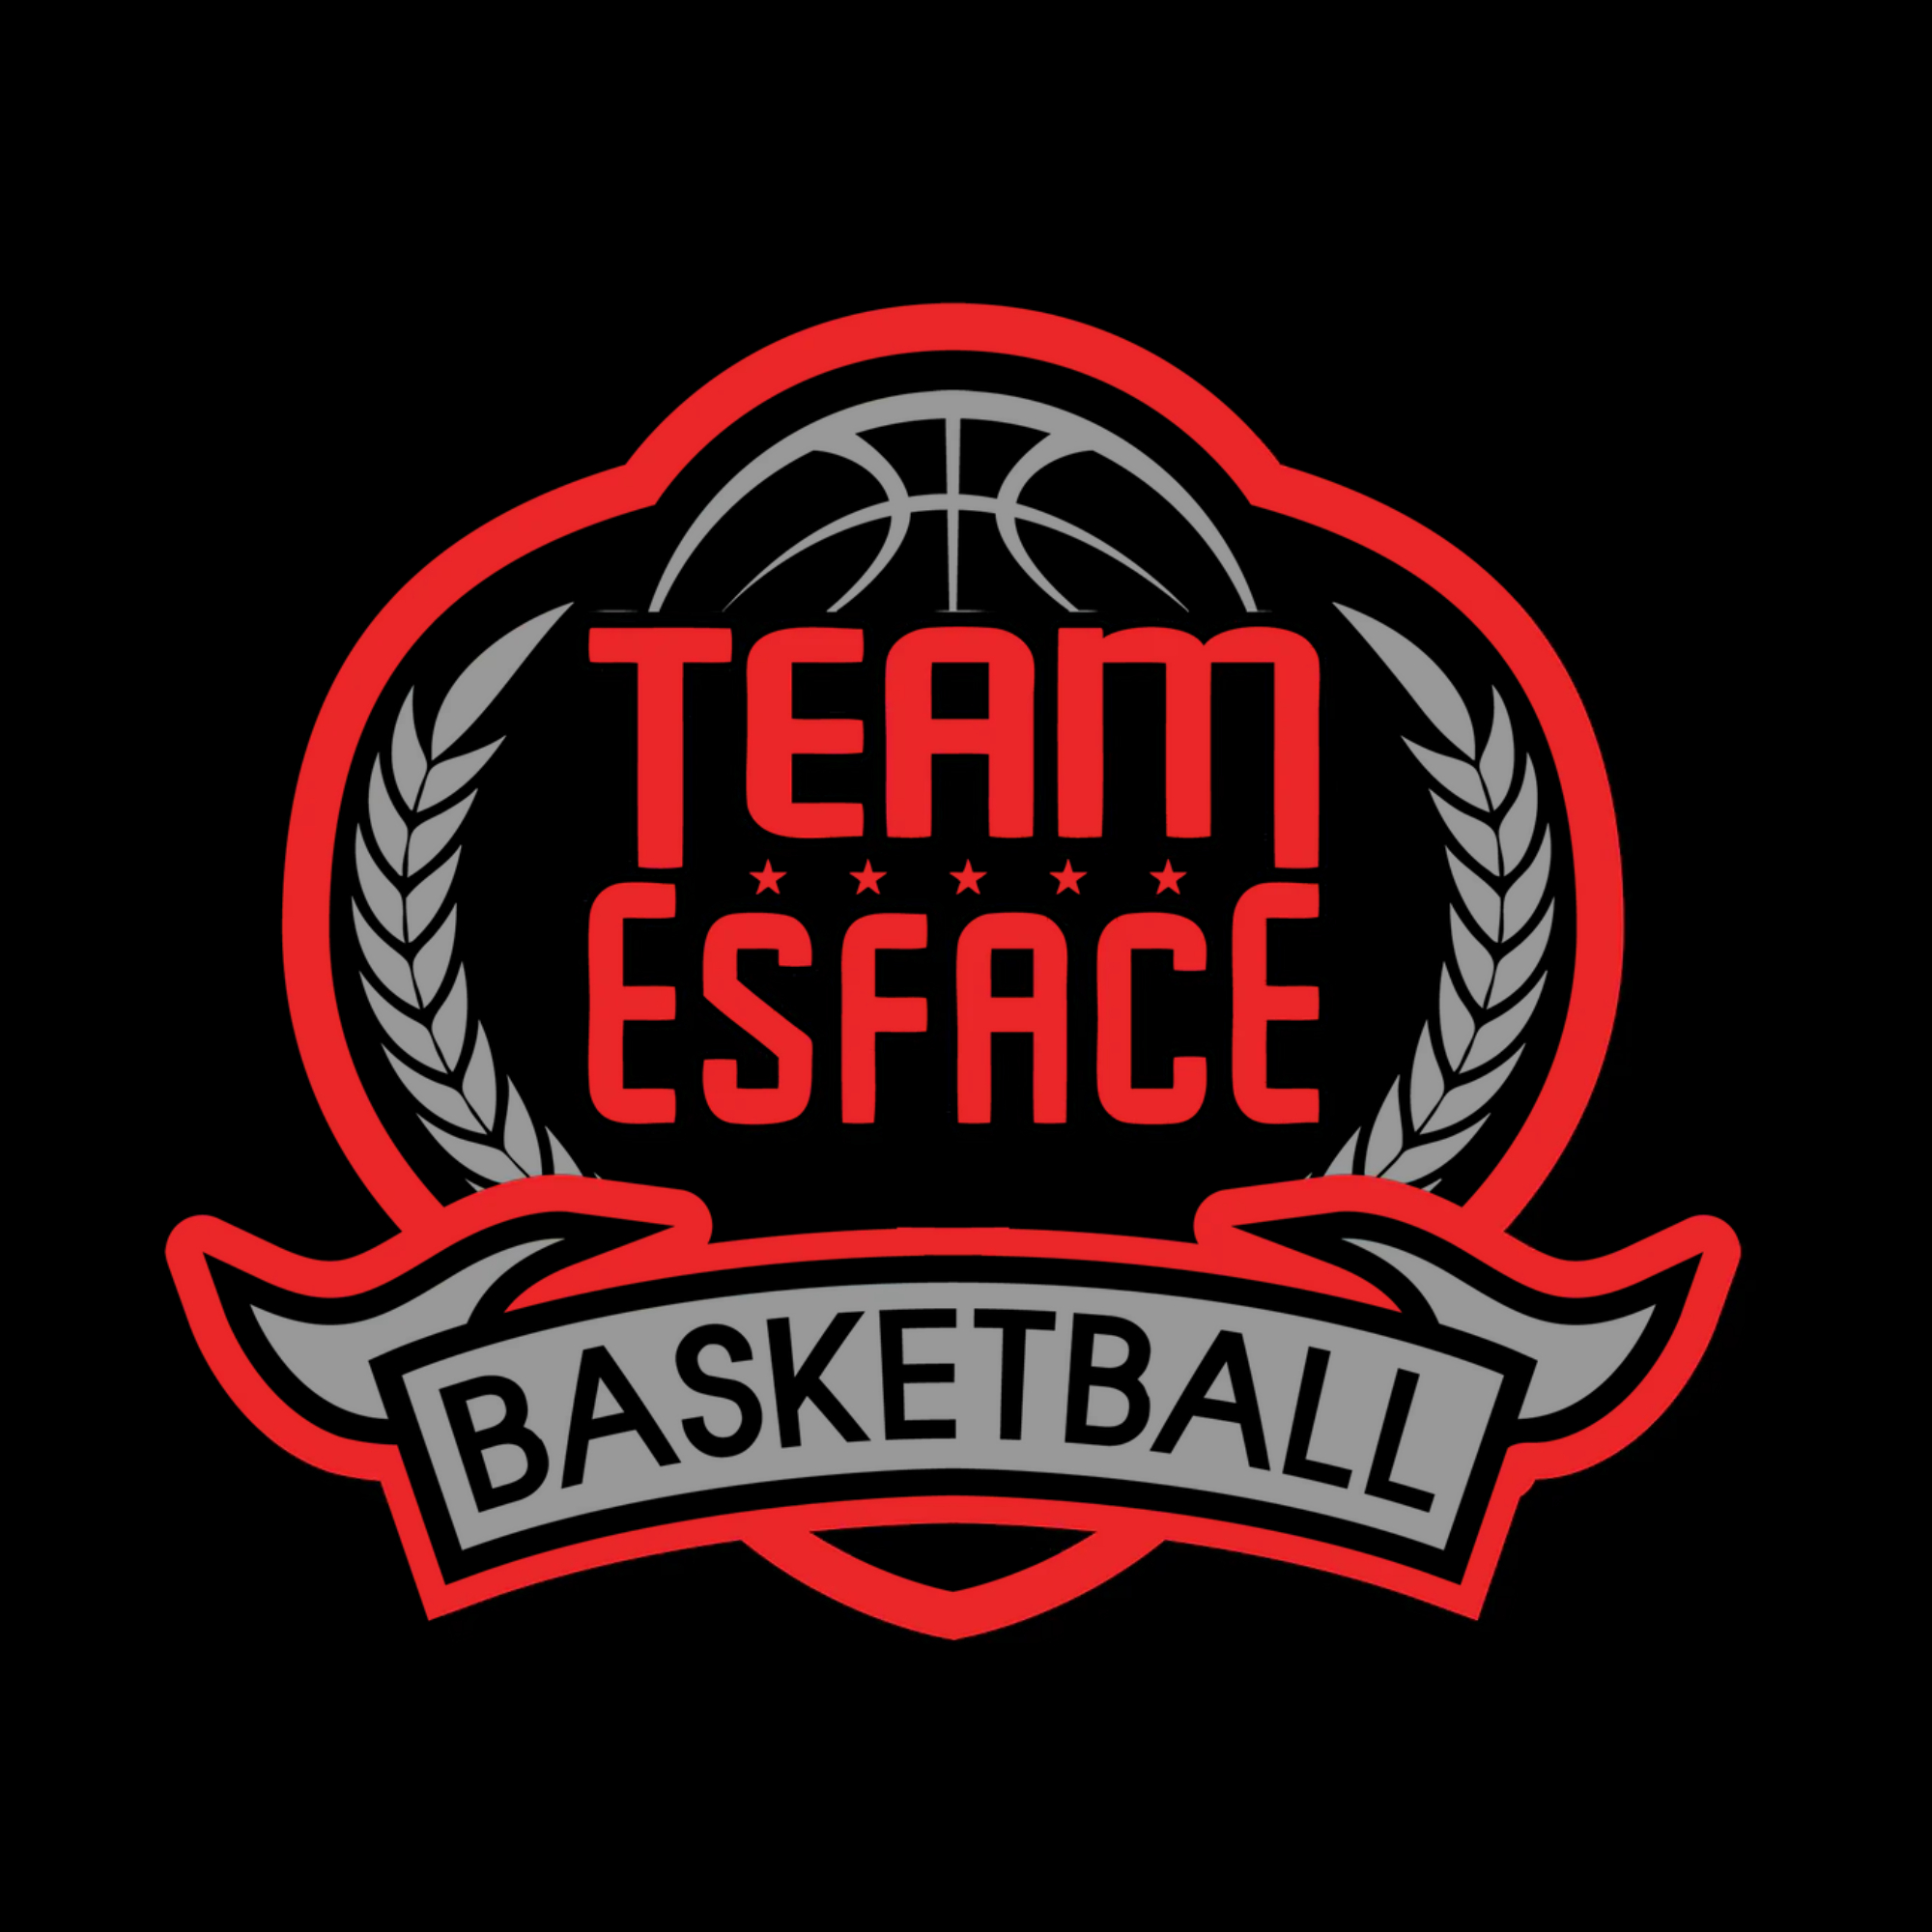 The official logo of Team Esface